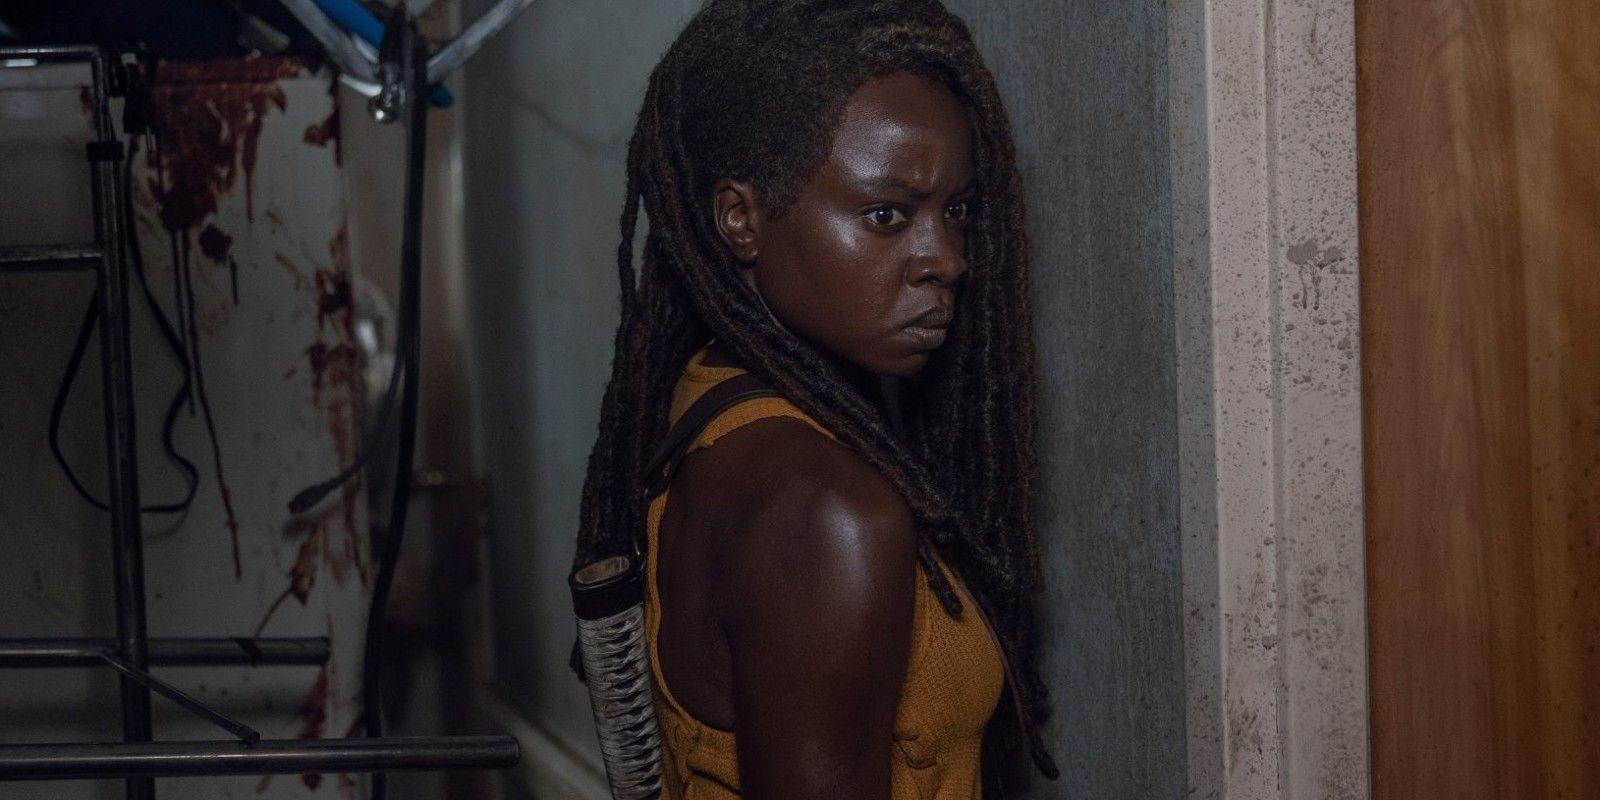 Michonne in The Walking Dead season 10 in a dark room, looking scared and angry.